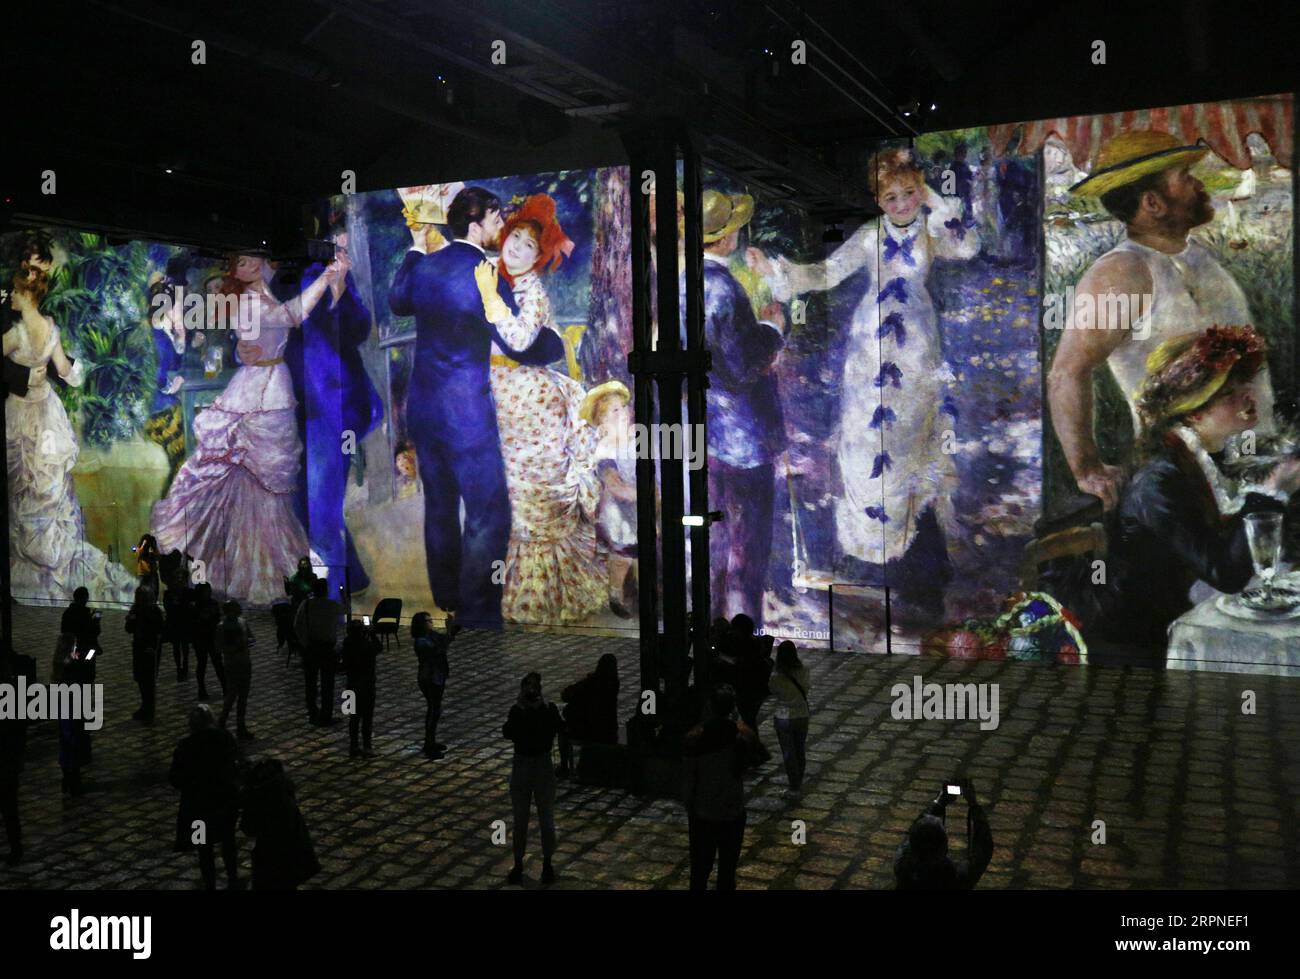 200227 -- PARIS, Feb. 27, 2020 -- People visit the digital exhibition titled Monet, Renoir...Chagall: Journeys around the Mediterranean during a press review in Paris, France, Feb. 27, 2020. The digital exhibition to be held from Feb. 28, 2020 to Jan. 3, 2021 presents visitors with an itinerary that spans the period between Impressionism and modernism. The exhibition immerses visitors in the masterpieces of 20 artists, including Renoir, Monet, Matisse, Chagall etc., and highlights the link between artistic creativity and the Mediterranean shores.  FRANCE-PARIS-DIGITAL EXHIBITION GaoxJing PUBLI Stock Photo